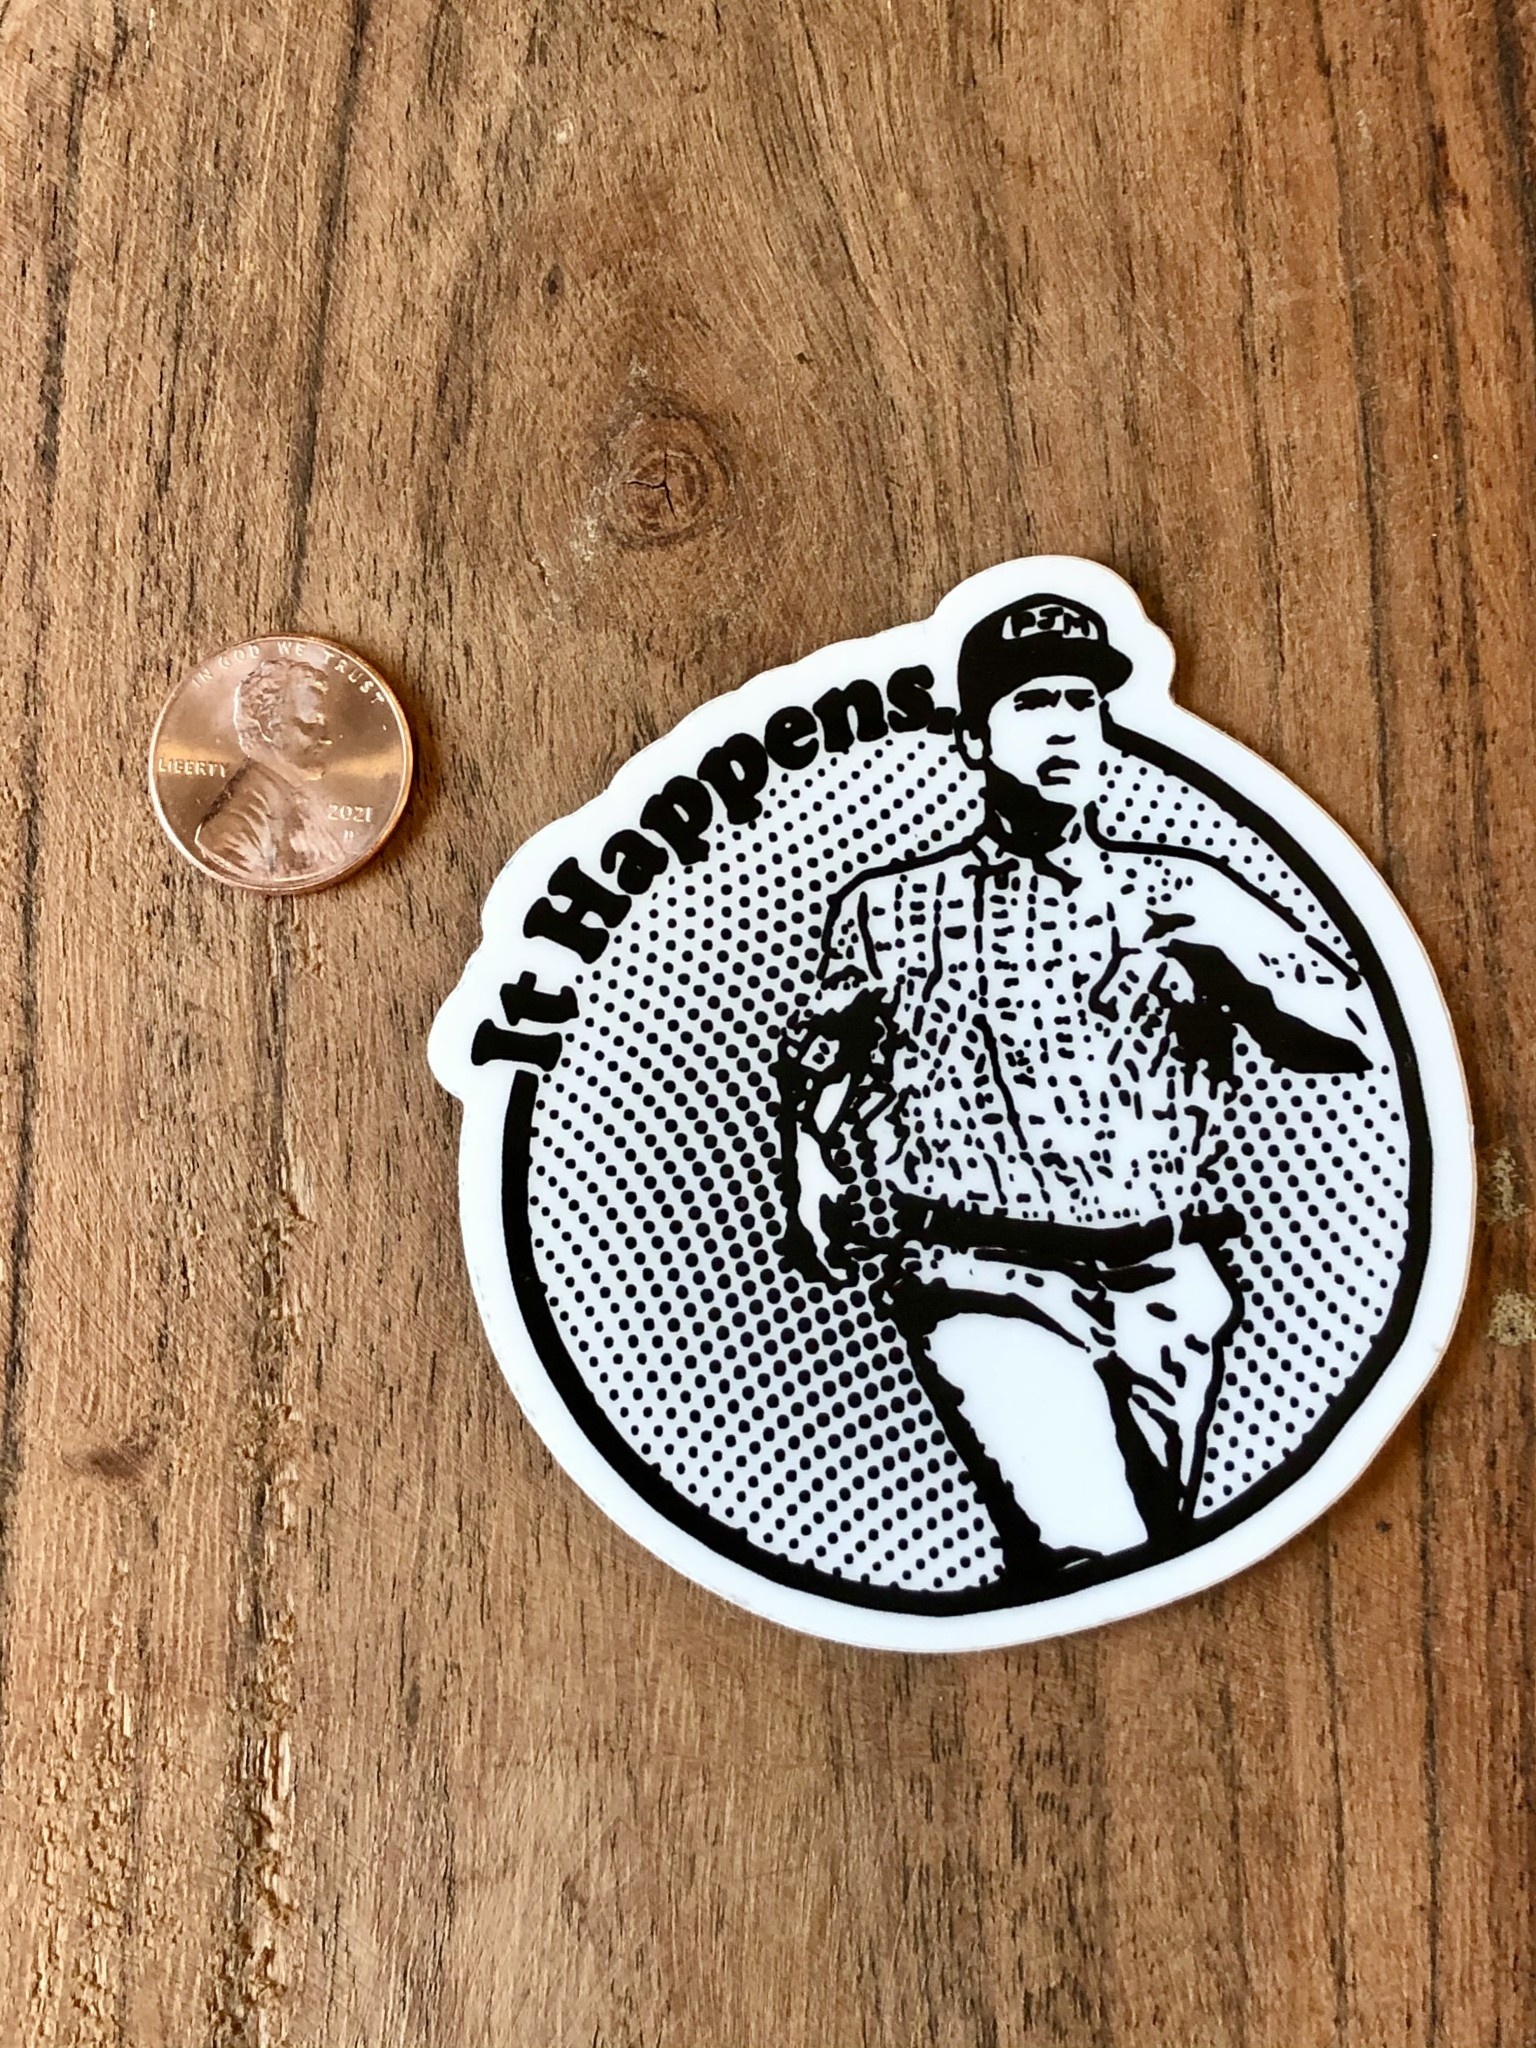 What's His Name Forrest Gump It Happens Sticker